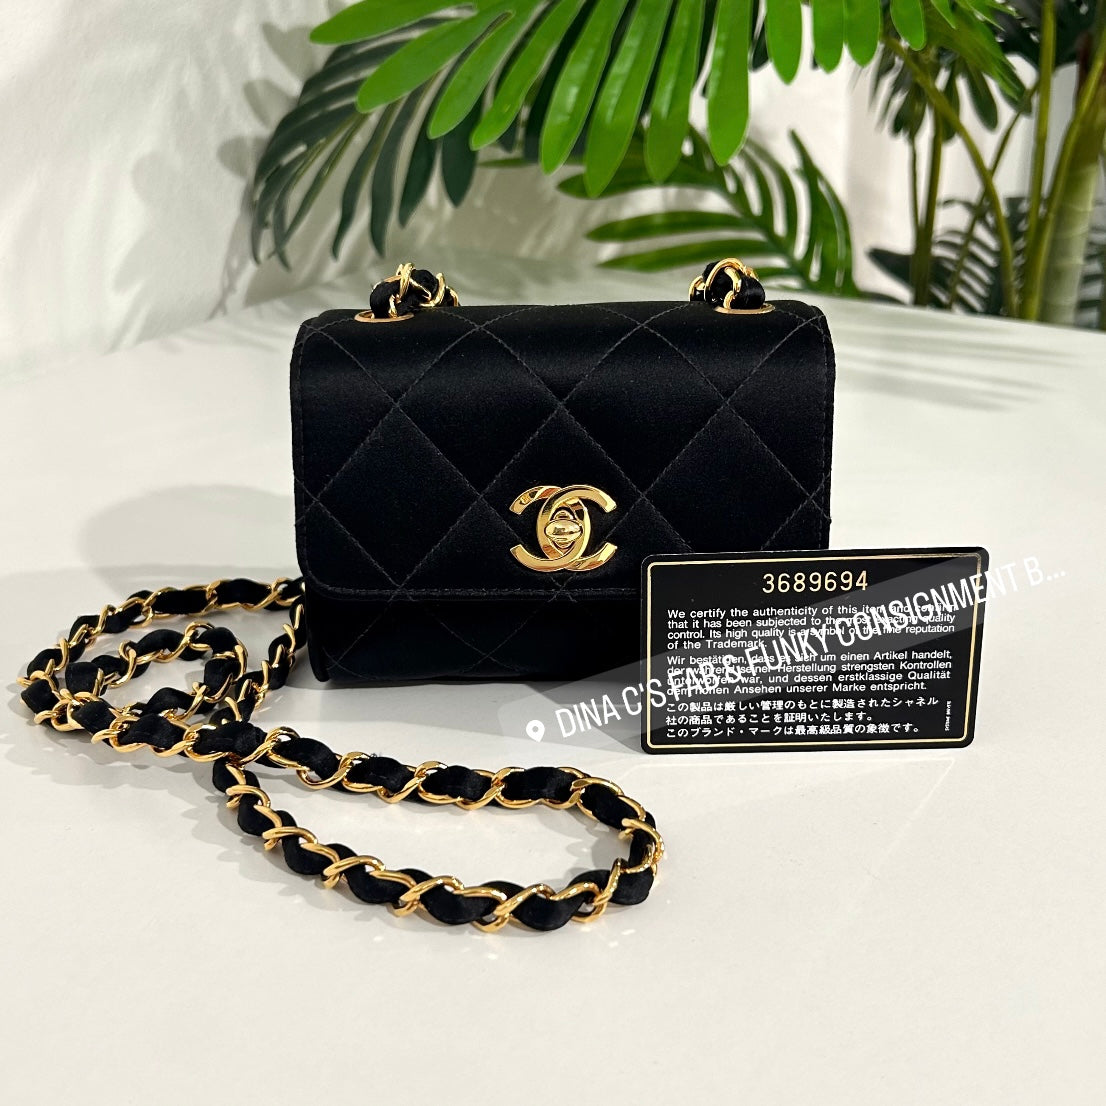 Used Chanel Handbags, Shoes, Jewelry & Accessories | FASHIONPHILE